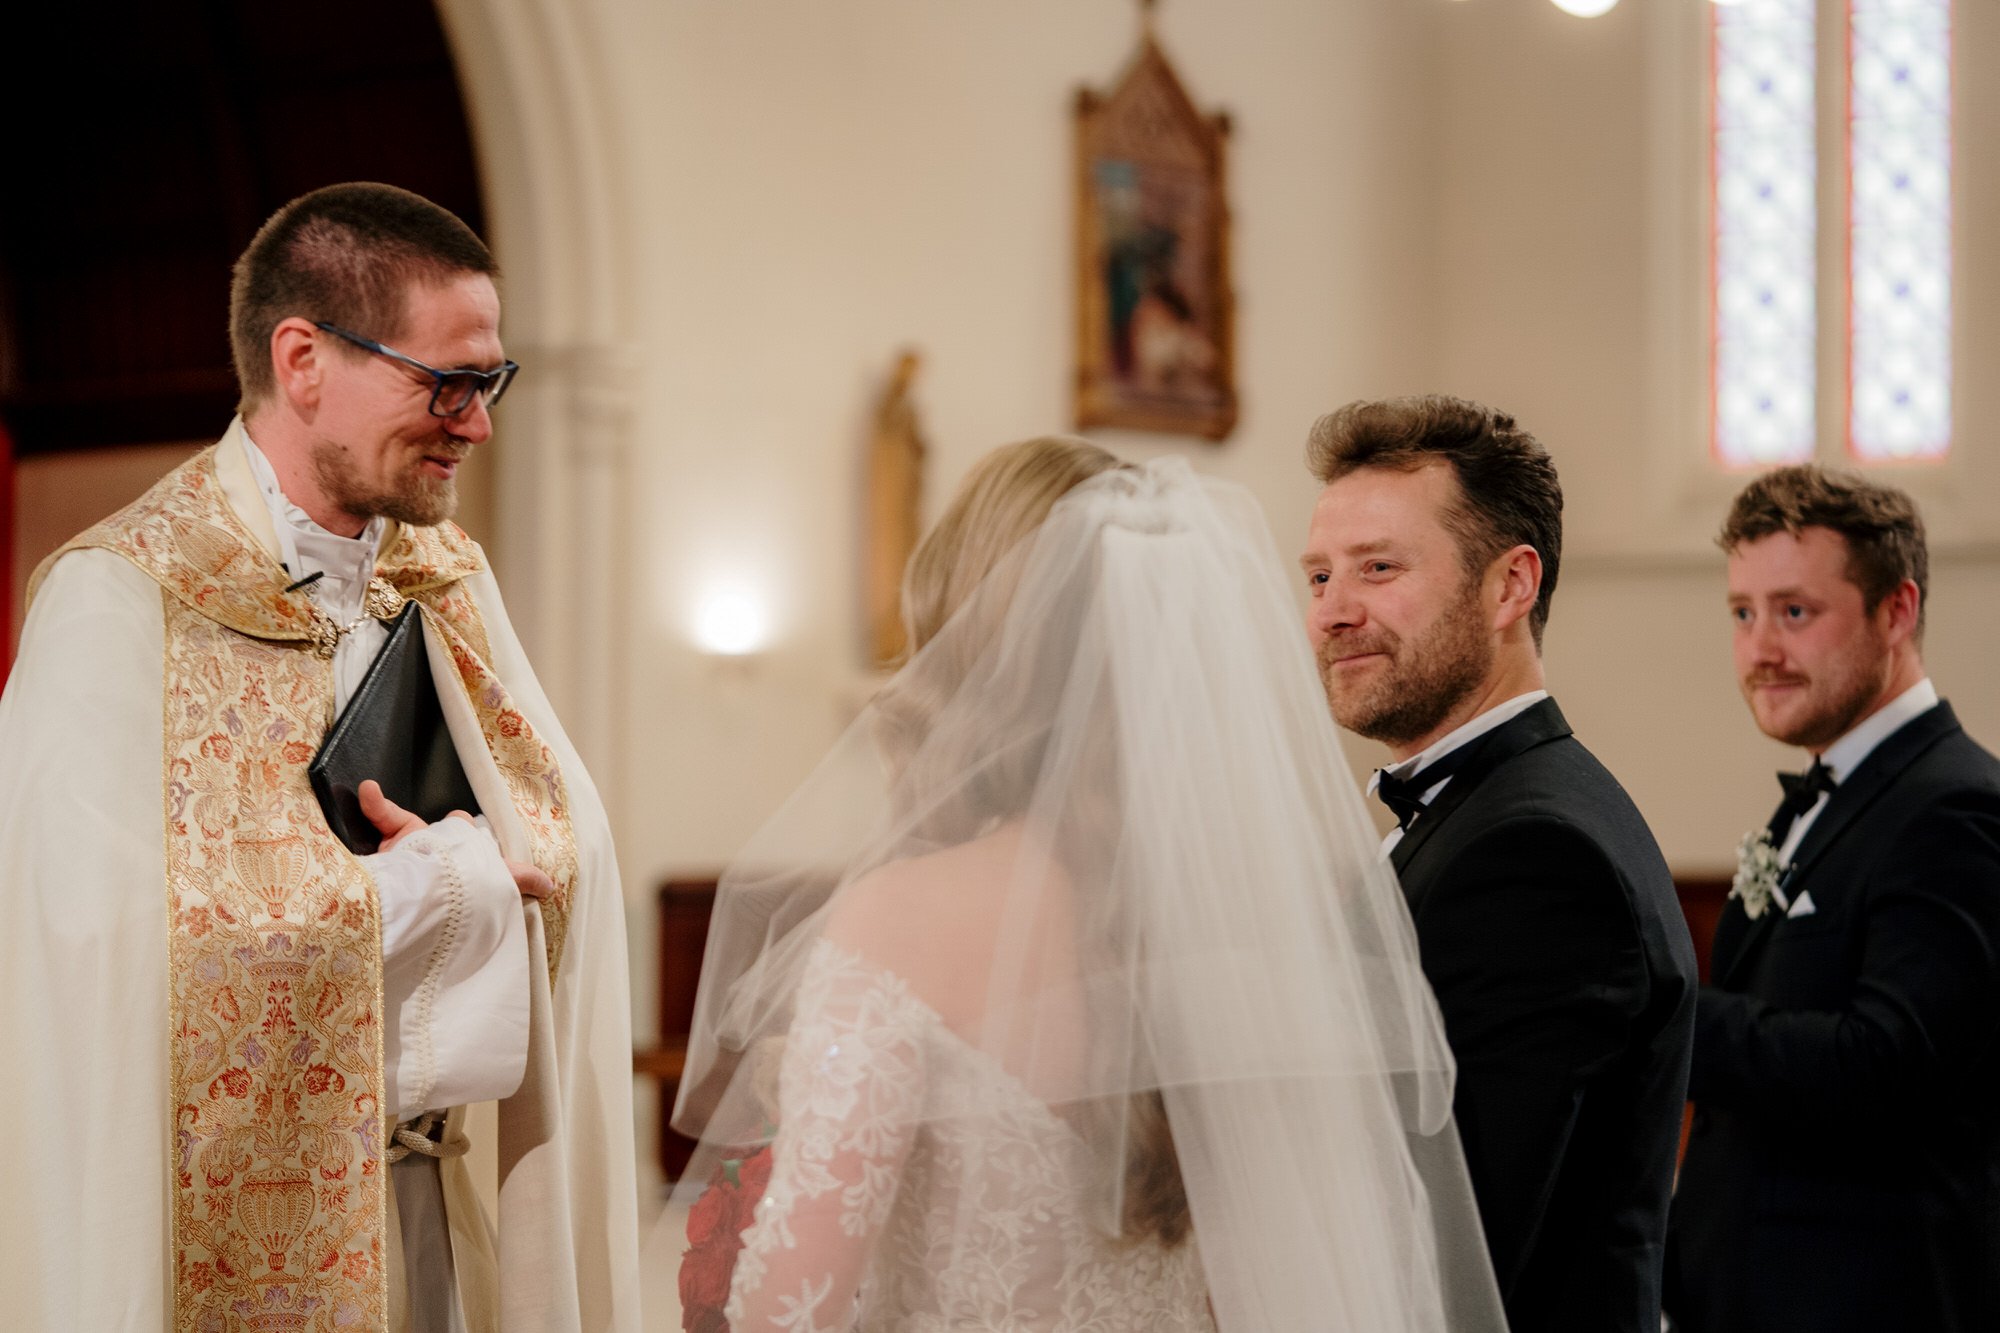 mantells-mt-eden-st-patricks-cathedral-alberton-house-top-auckland-wedding-phtographer-2023-photography-videography-film-new-zealand-NZ-best-urban-venue-catholic-ceremony-dear-white-productions (145).jpg